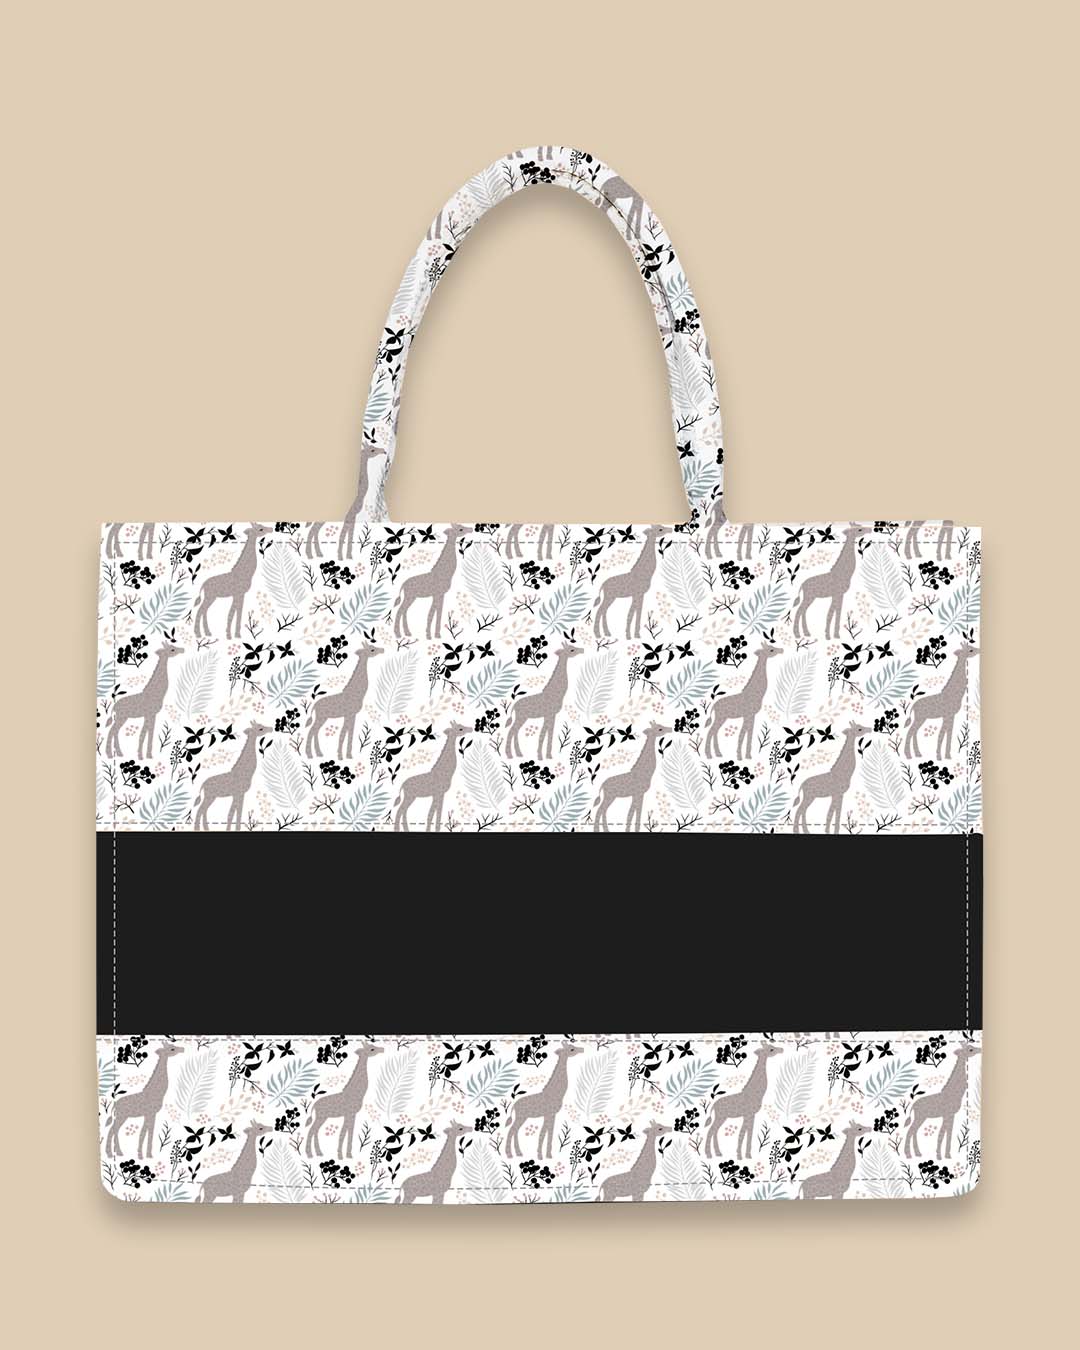 Customized Tote Bag Designed with Fernsv Holy Berry Flowers And Giraffe